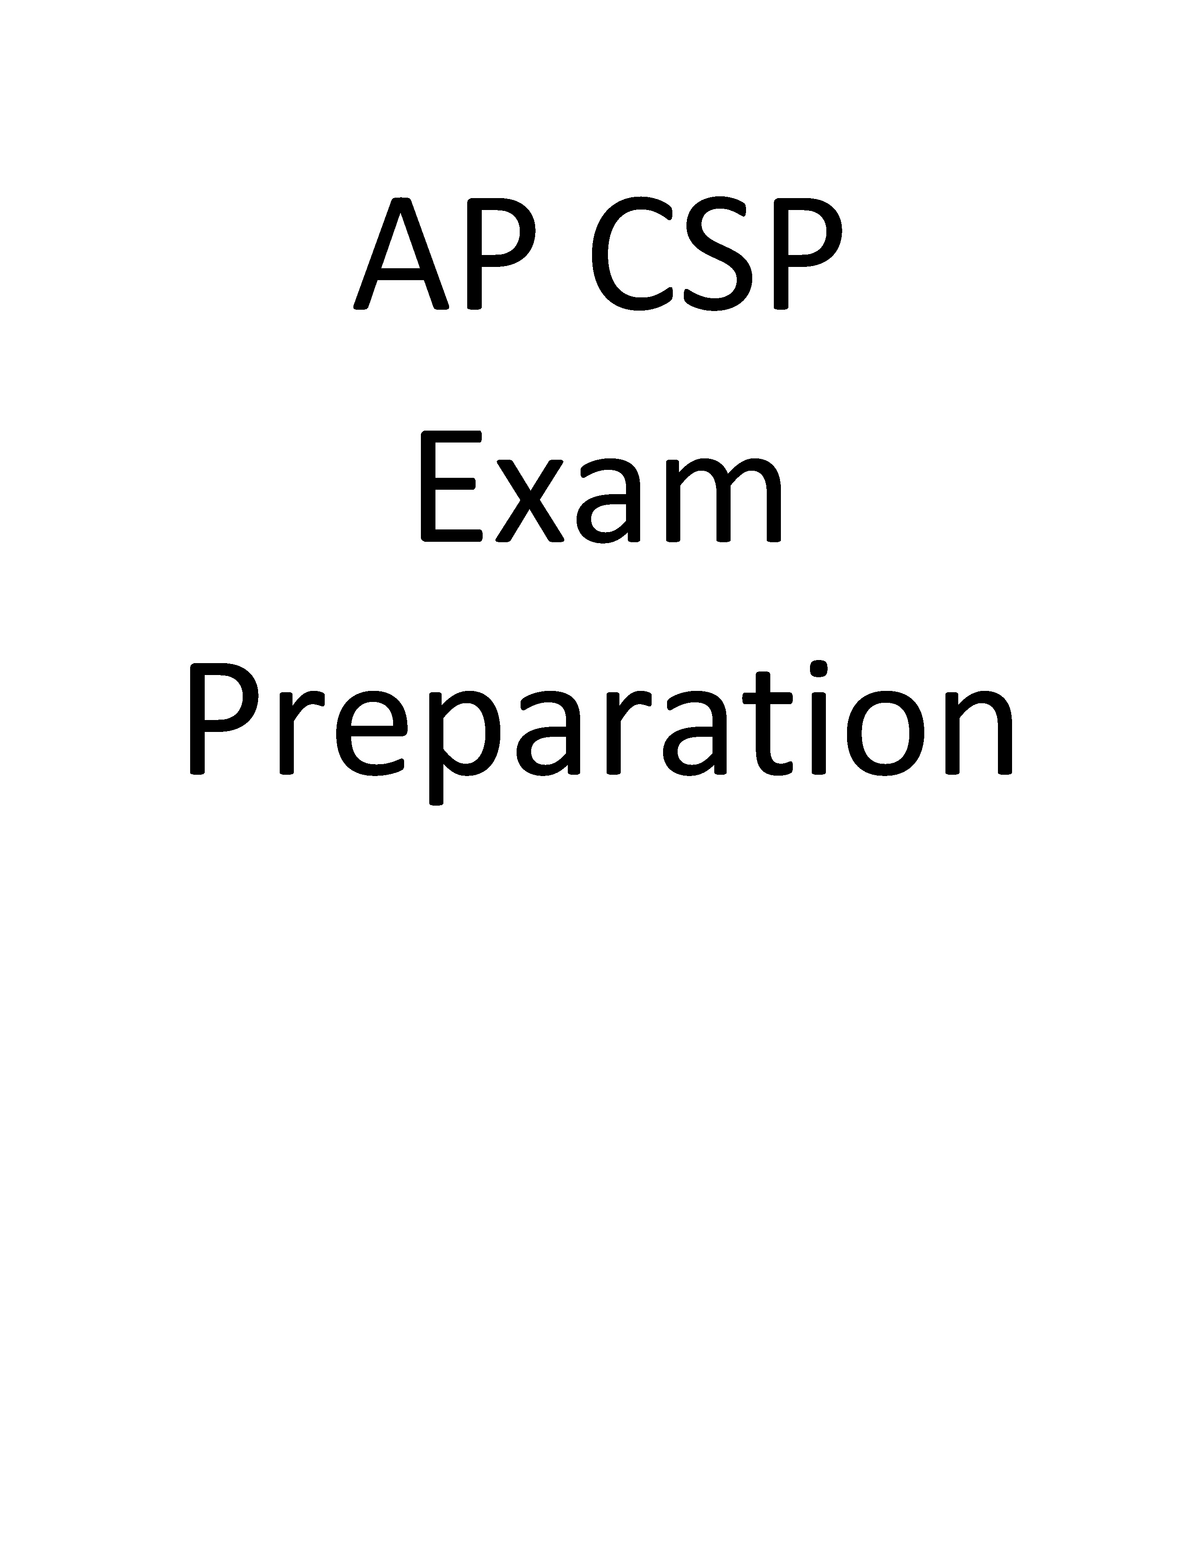 AP CSP Exam Study Guide with page numbers AP CSP Exam Preparation